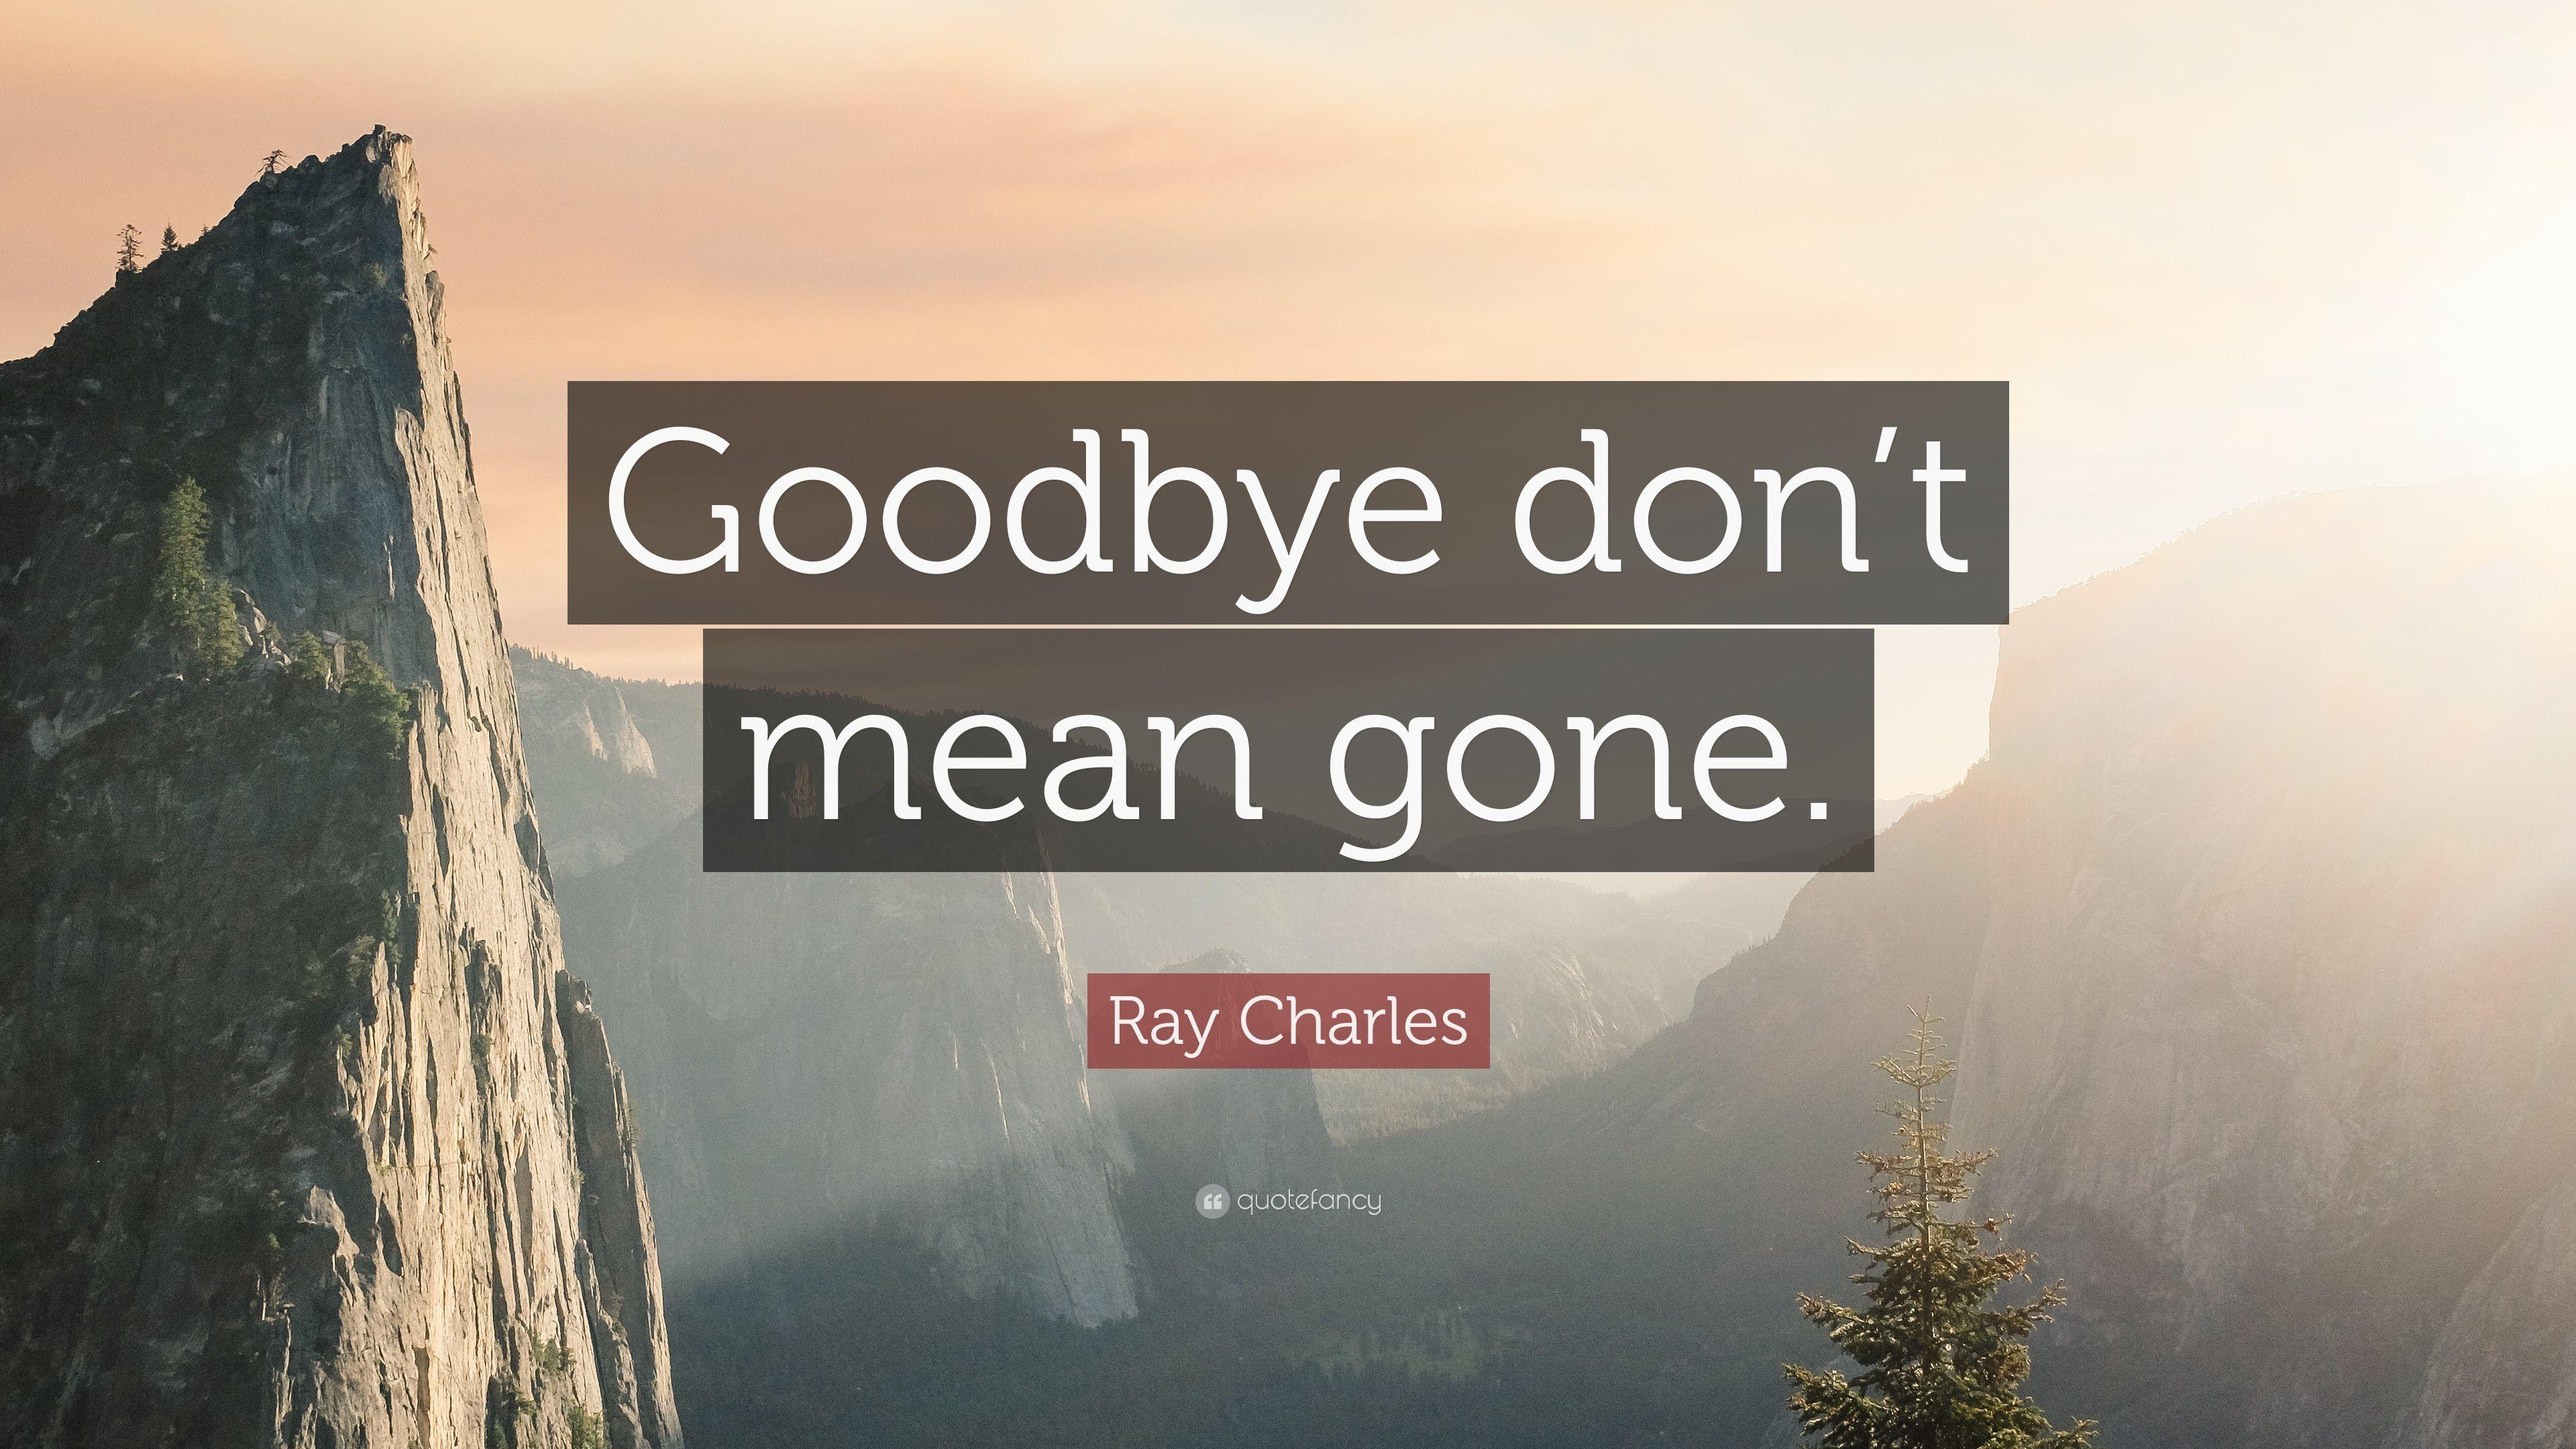 Ray Charles Quote: “Goodbye don't mean gone.” 7 wallpaper